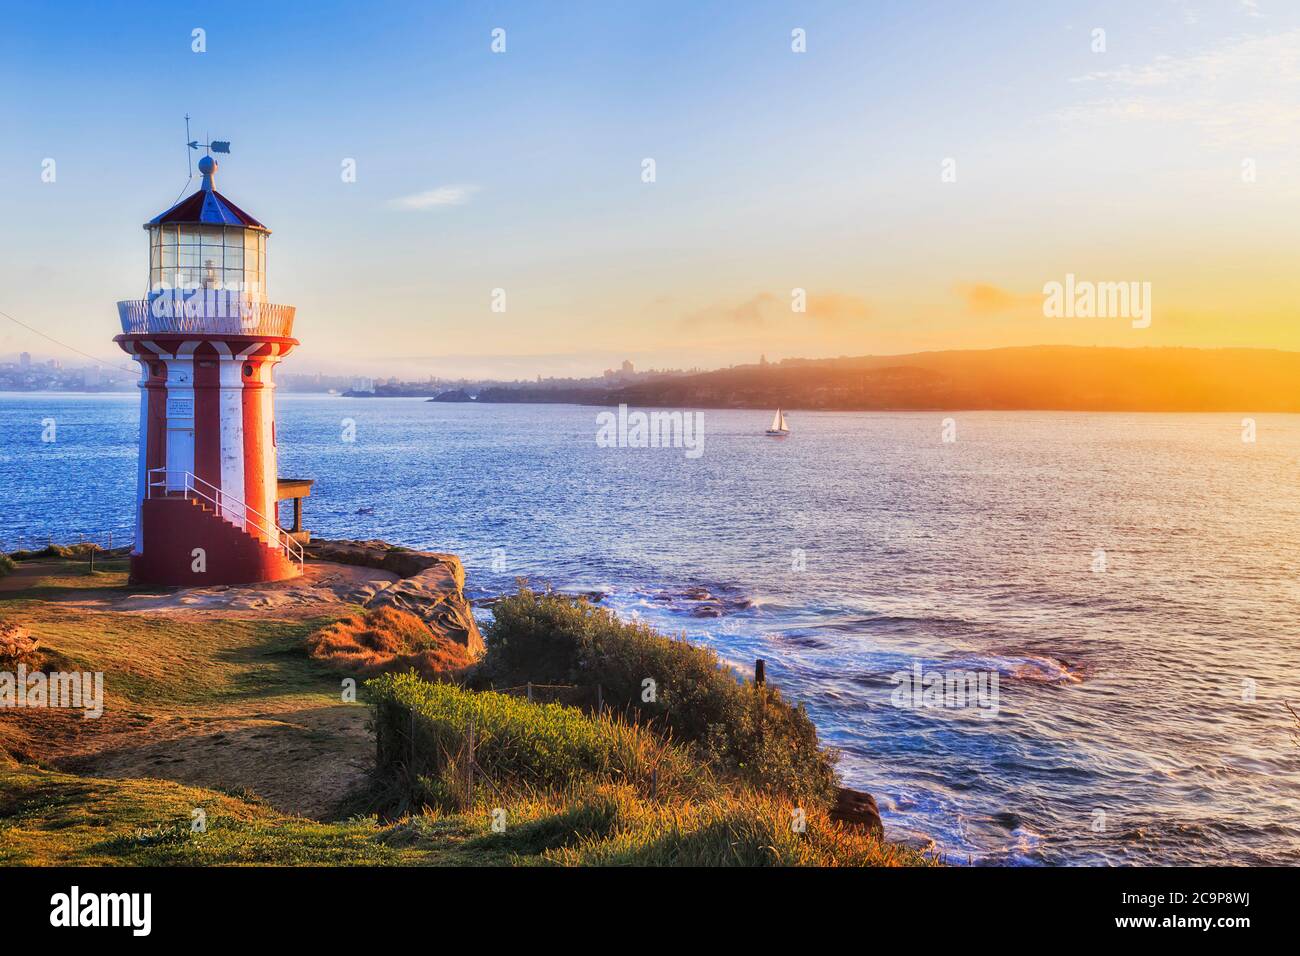 Historic Hornby lighthouse at Sydney South head facing rising sun on Pacific coast entrance to Harbour. Stock Photo